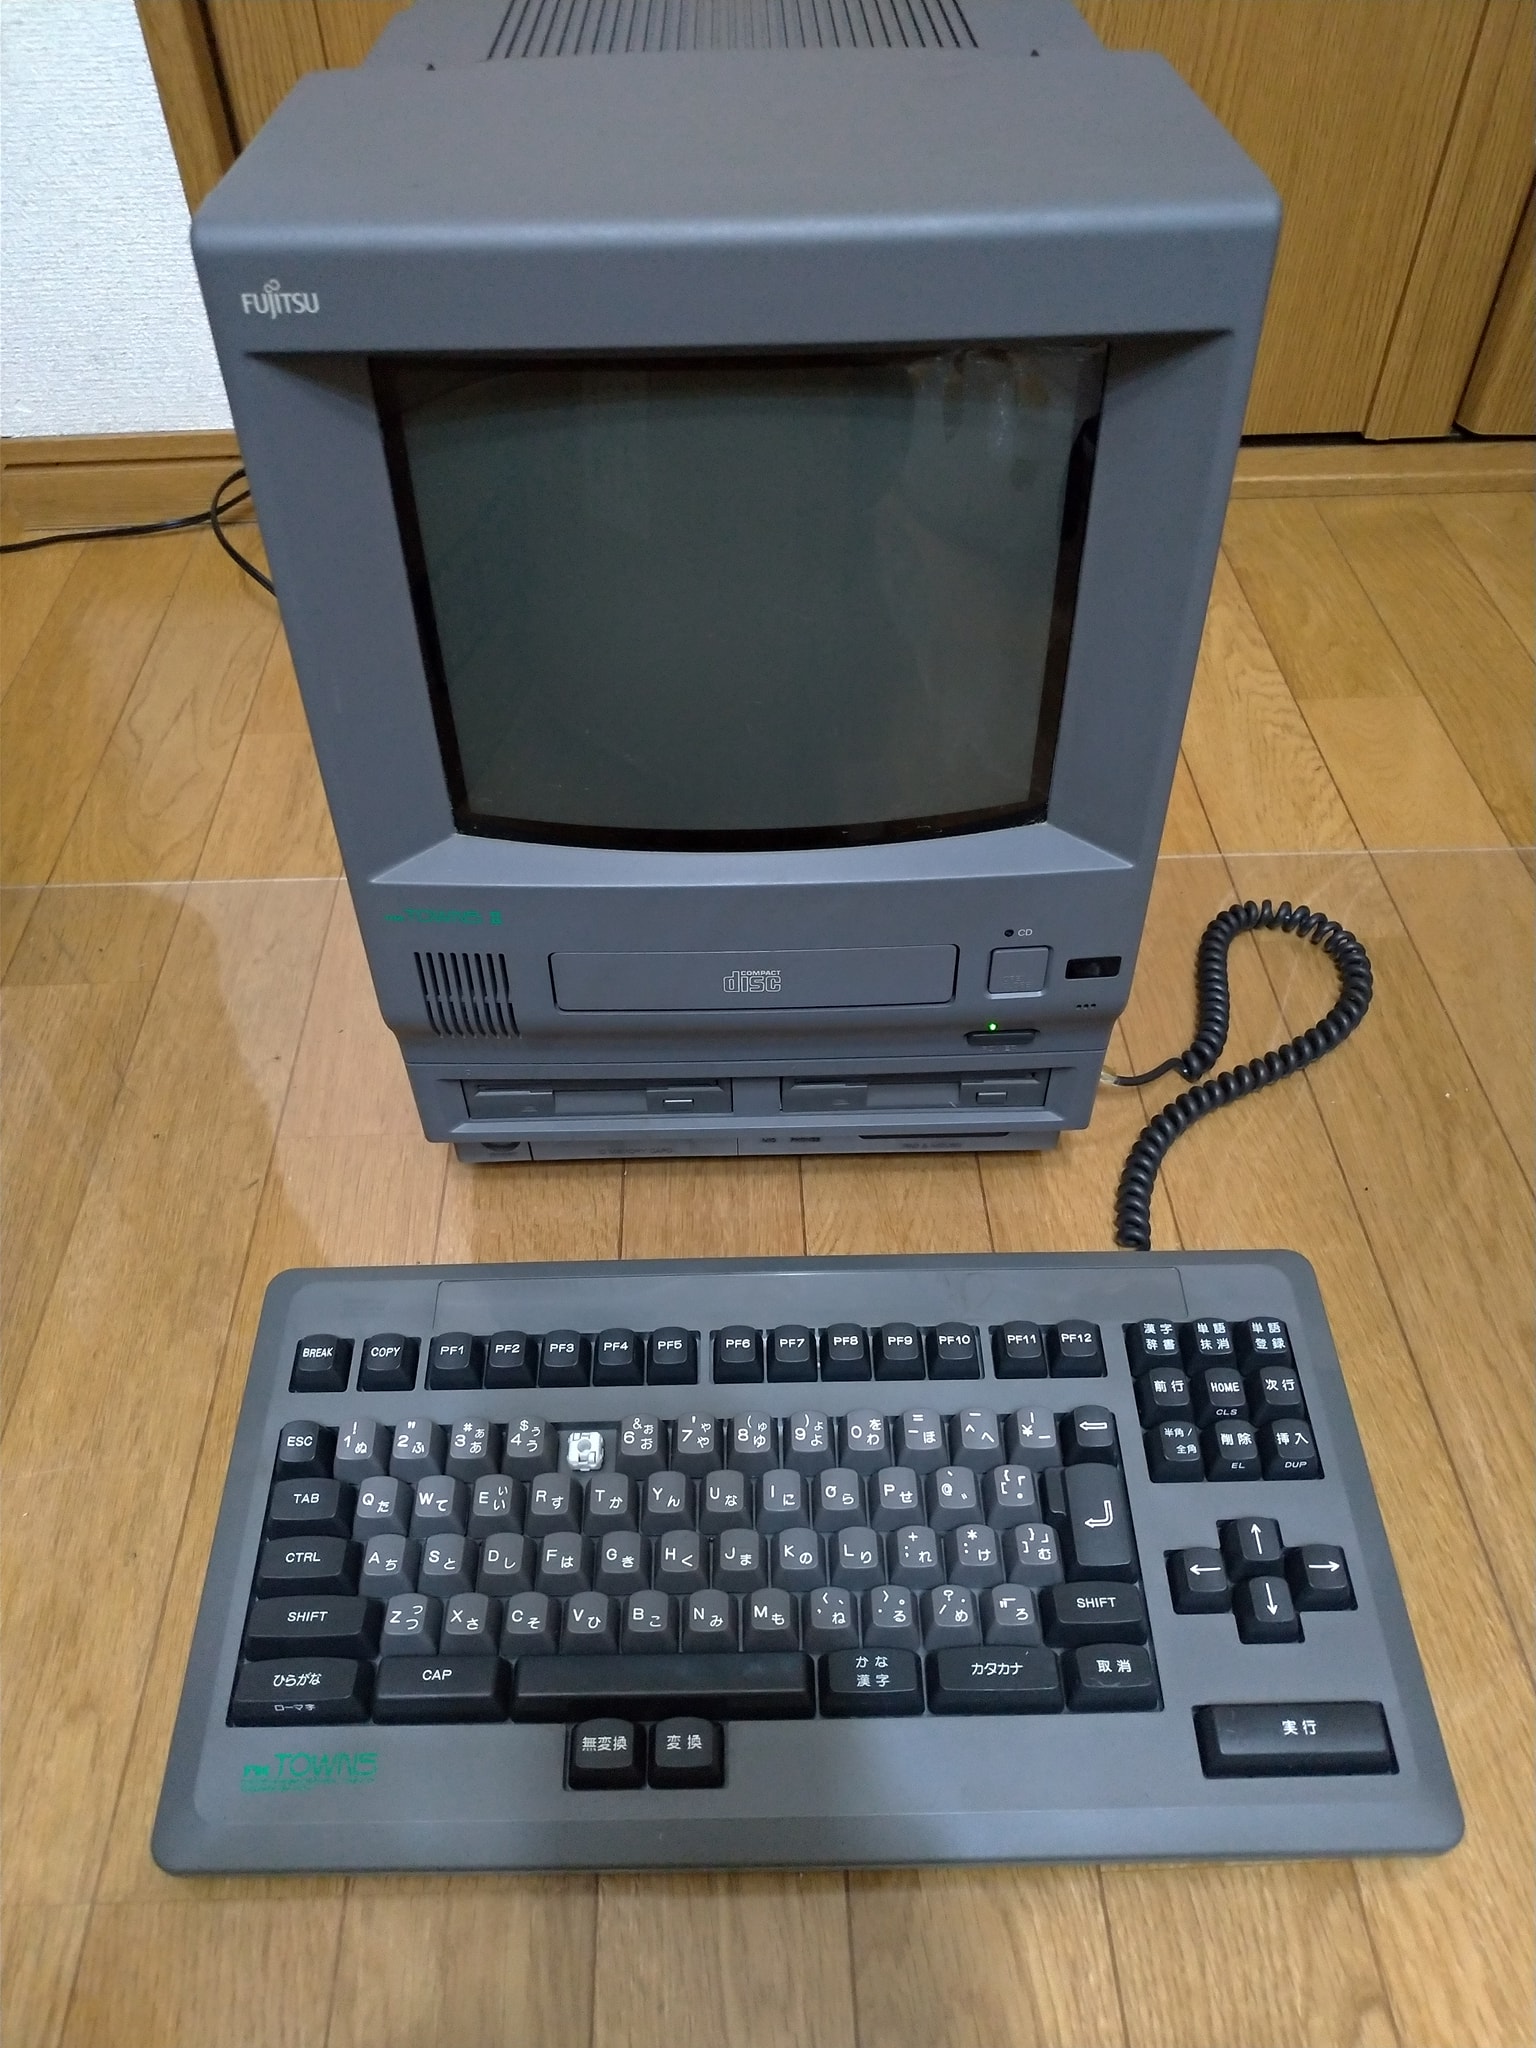 FM Towns UX20 – Japanese Vintage Computer Collection